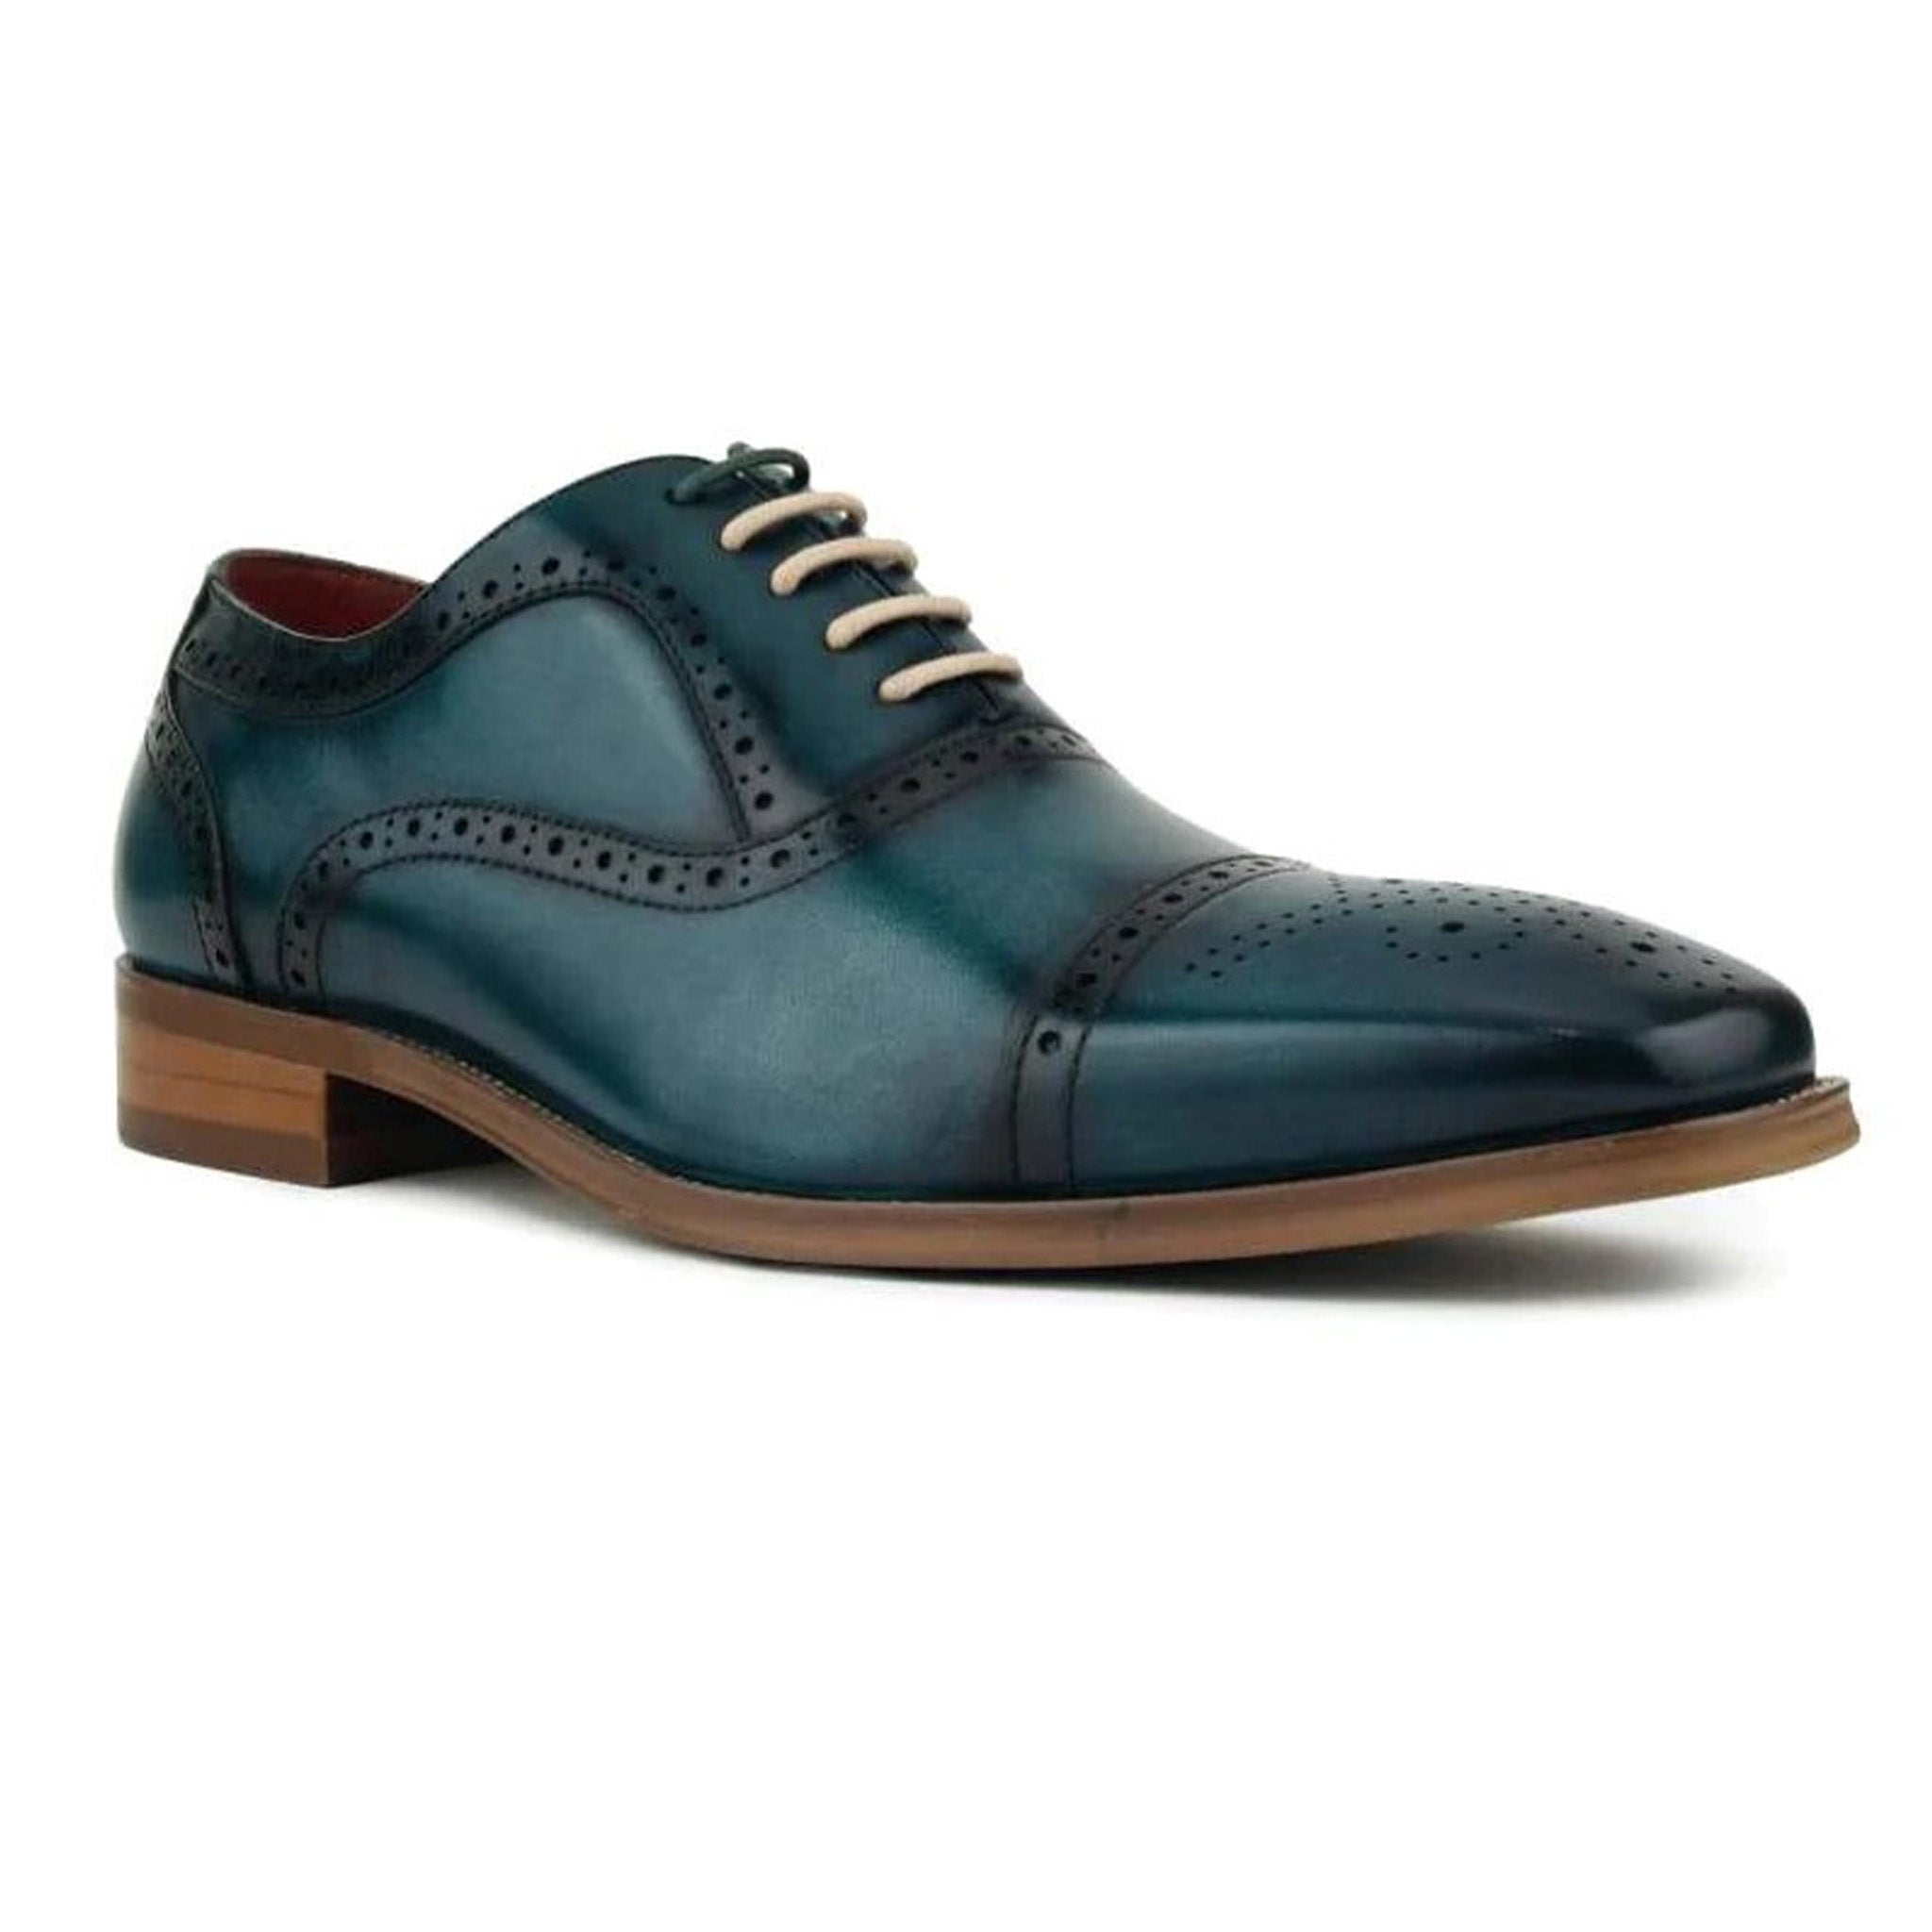 Turquoise Leather Oxford Shoes